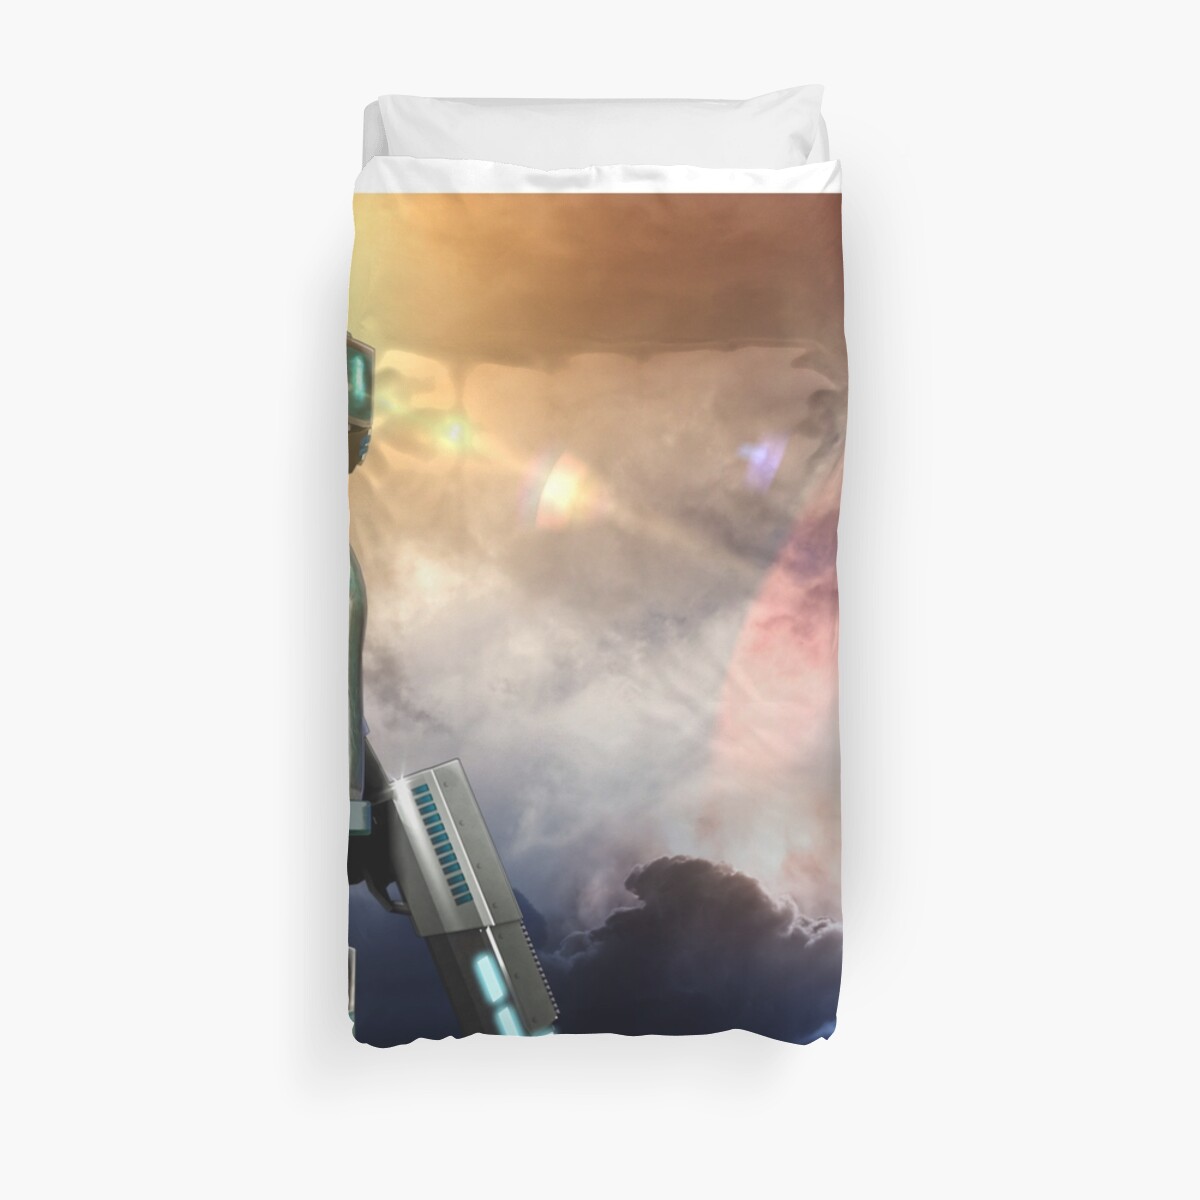 Roblox Game World Duvet Cover By Best5trading Redbubble - inside the world of roblox games comforter by best5trading